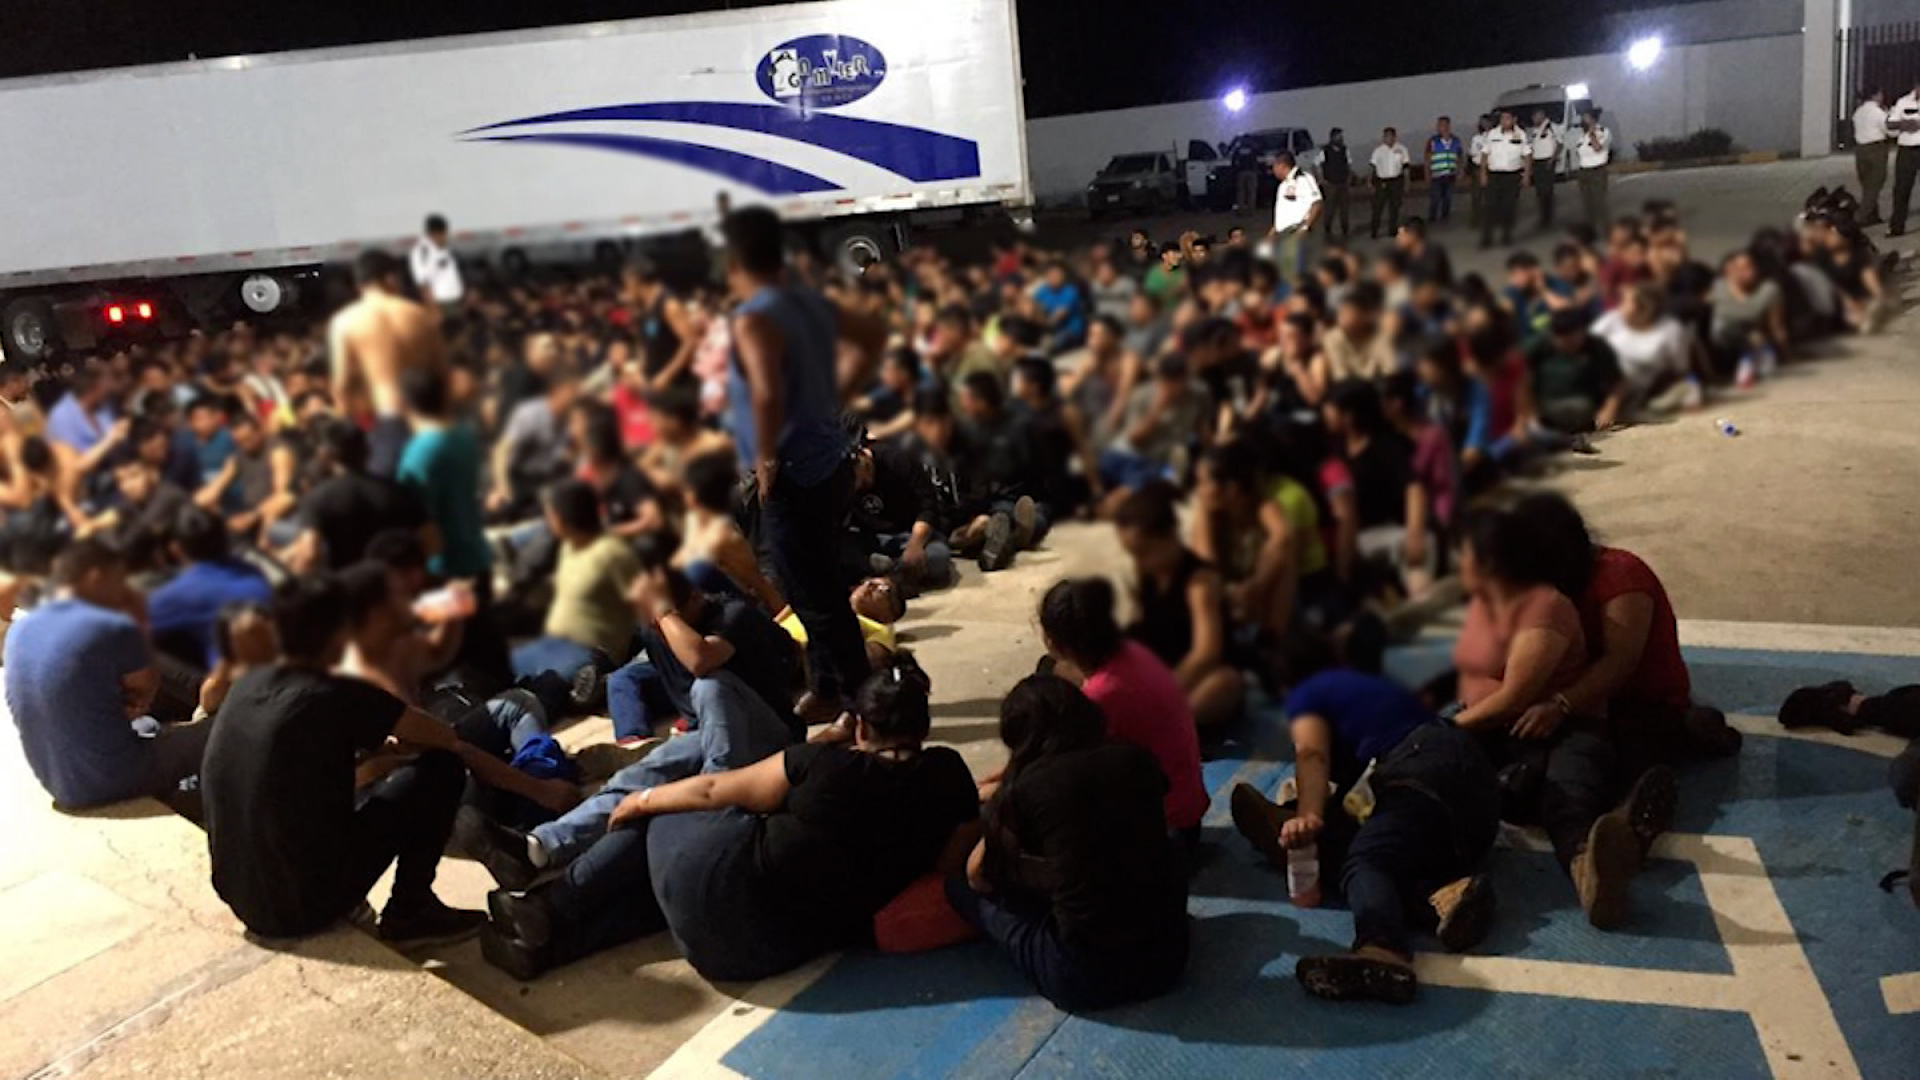 They found 343 migrants abandoned in a cargo truck in Mexico